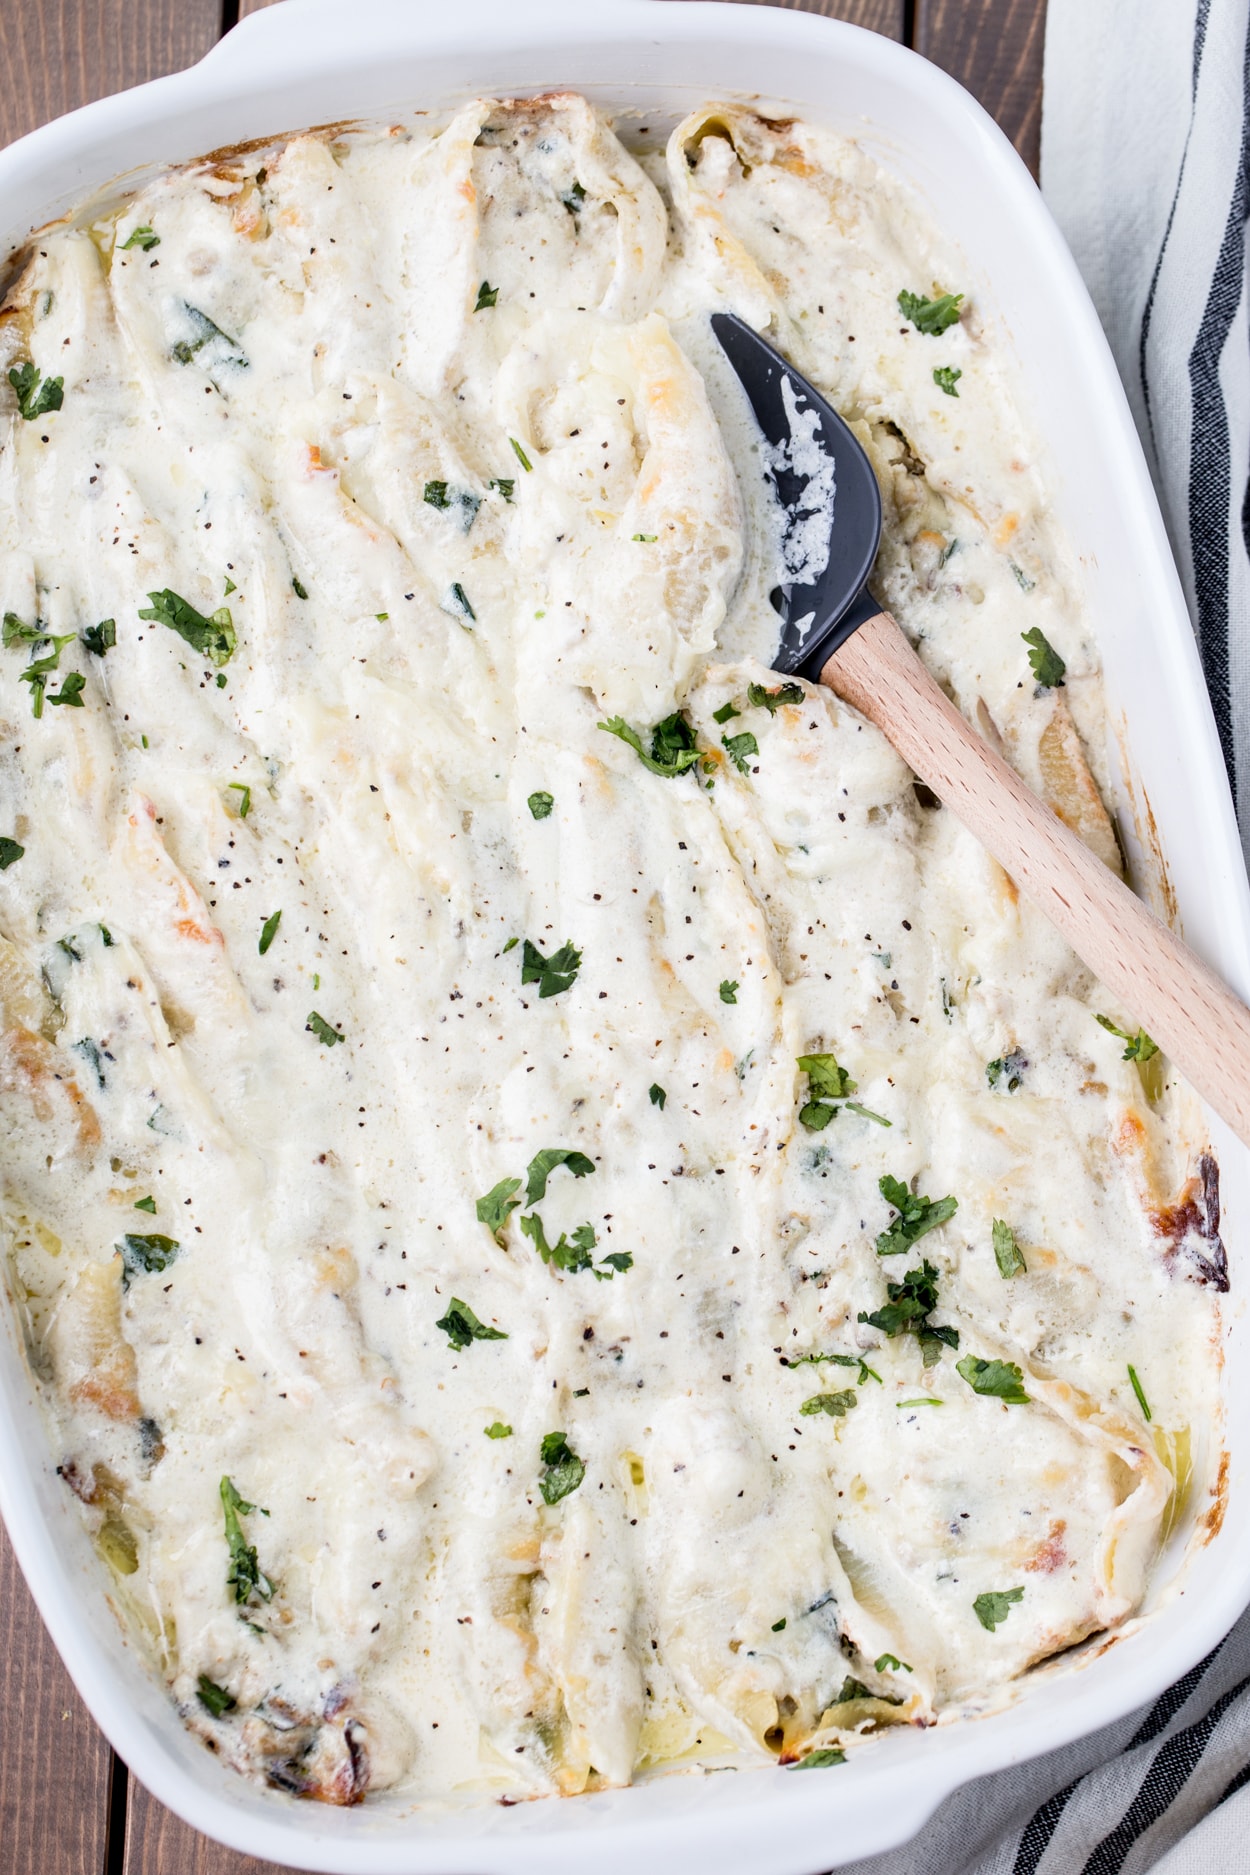 Chicken pasta shells in an Alfredo sauce in a casserole dish topped with fresh greens.